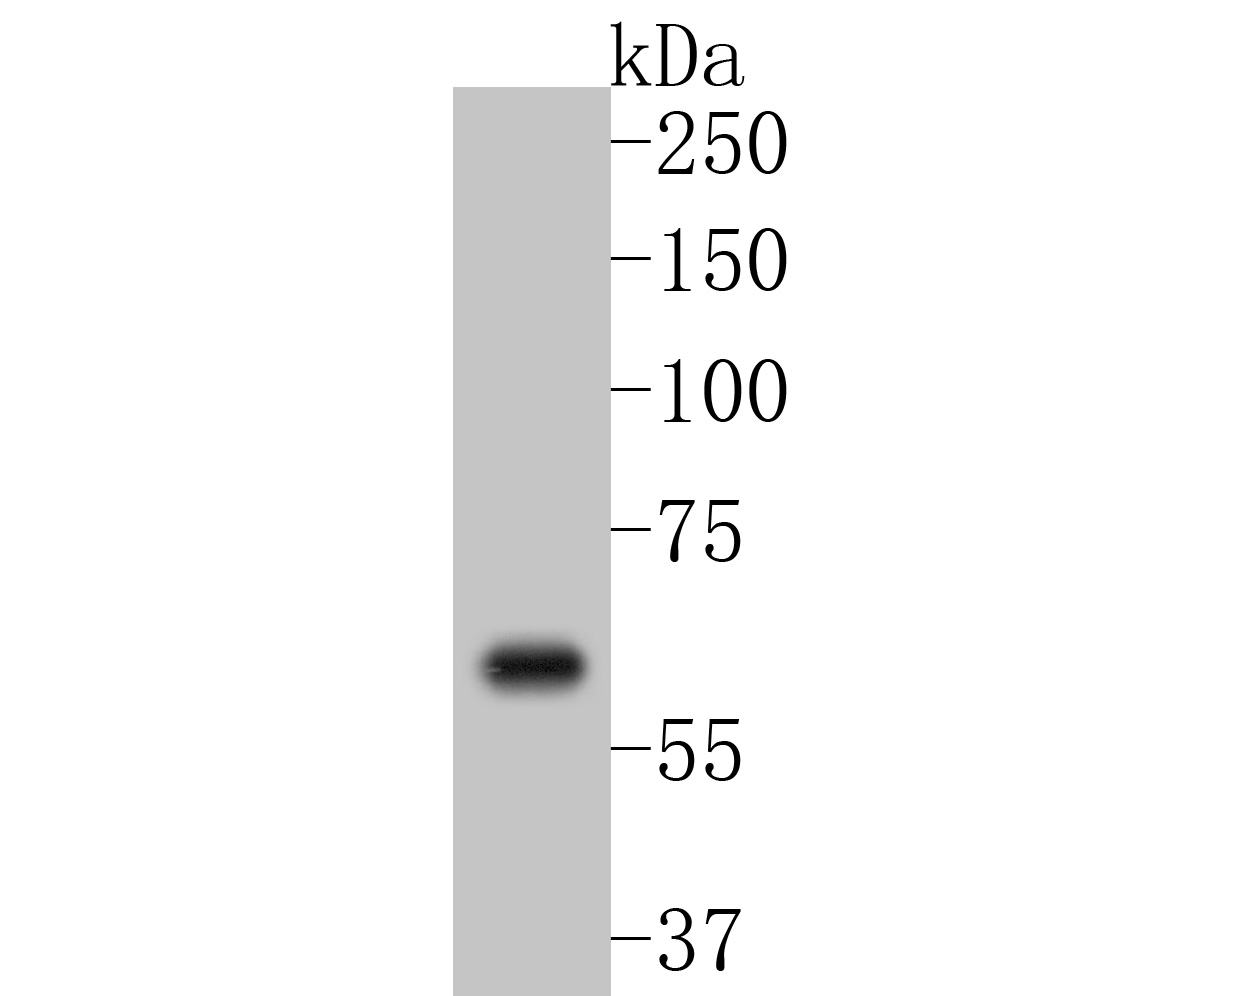 Western blot analysis of COX2/Cyclooxygenase 2 on A549 cell lysates. Proteins were transferred to a PVDF membrane and blocked with 5% BSA in PBS for 1 hour at room temperature. The primary antibody (ET1610-23, 1/500) was used in 5% BSA at room temperature for 2 hours. Goat Anti-Rabbit IgG - HRP Secondary Antibody (HA1001) at 1:5,000 dilution was used for 1 hour at room temperature.